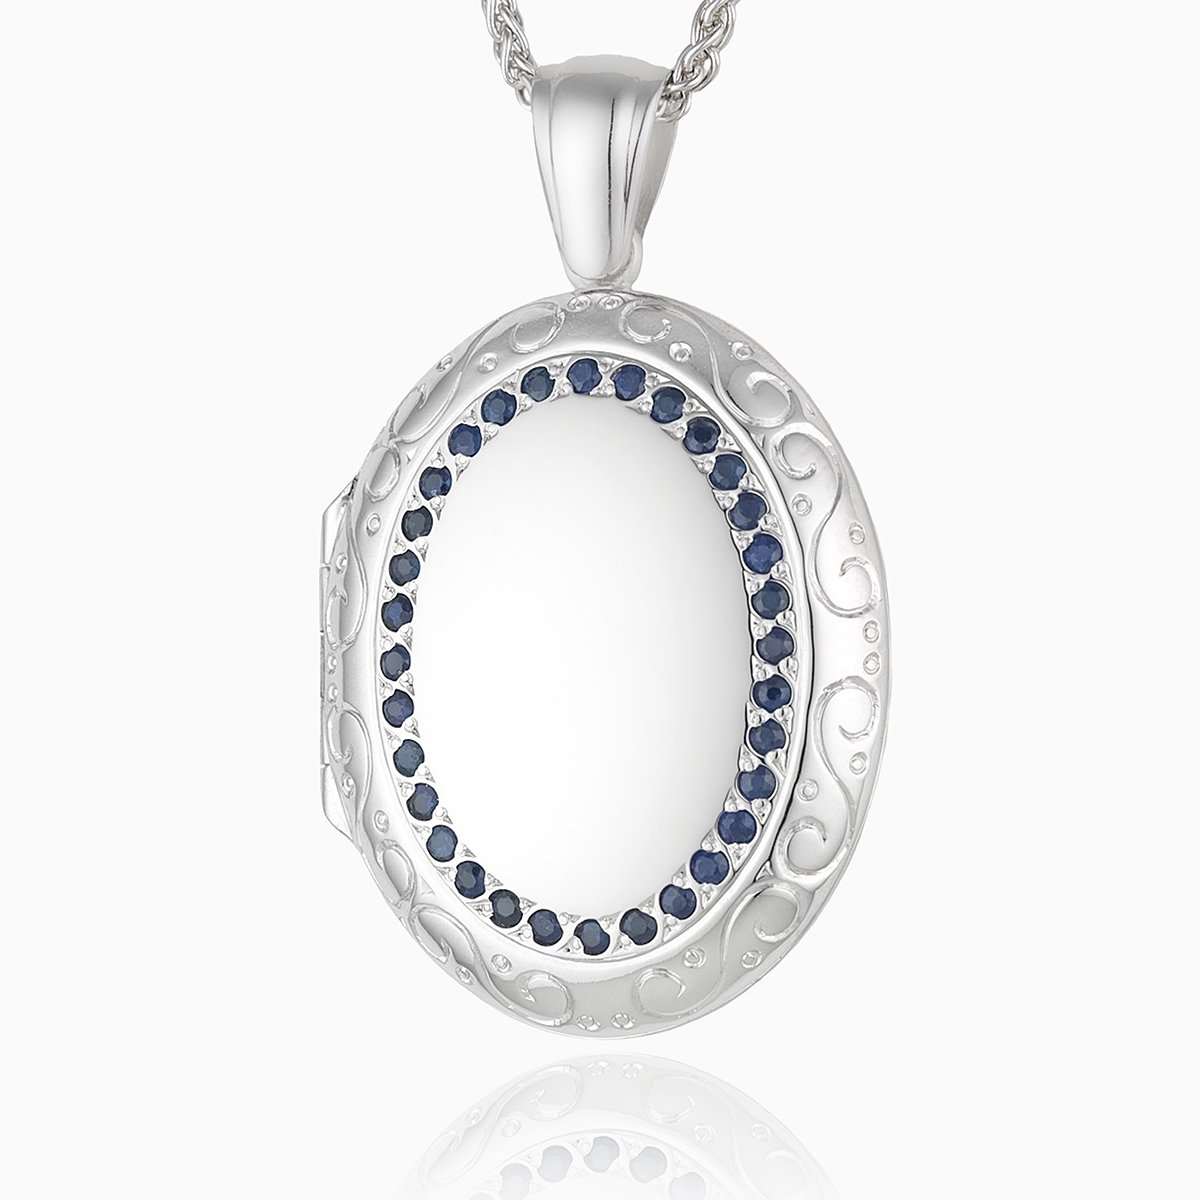 18 ct white gold large oval 4-photo locket set with blue sapphires and an engraved border, on an 18 ct white gold spiga chain